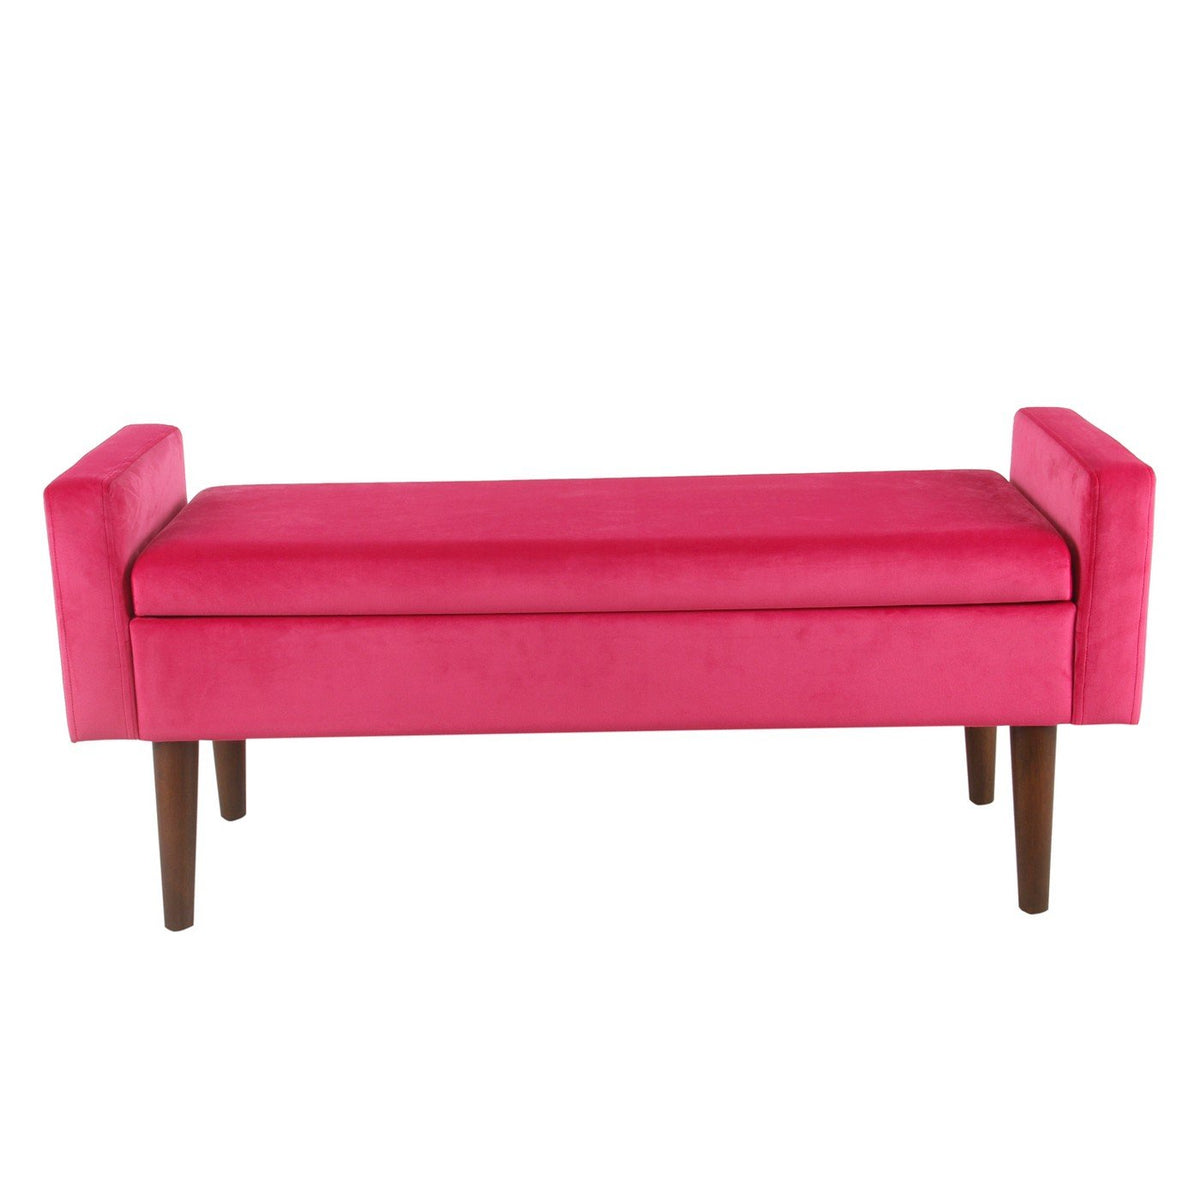 BM193992 - Velvet Upholstered Wooden Bench with Tapered Legs and Track Armrest, Pink and Brown